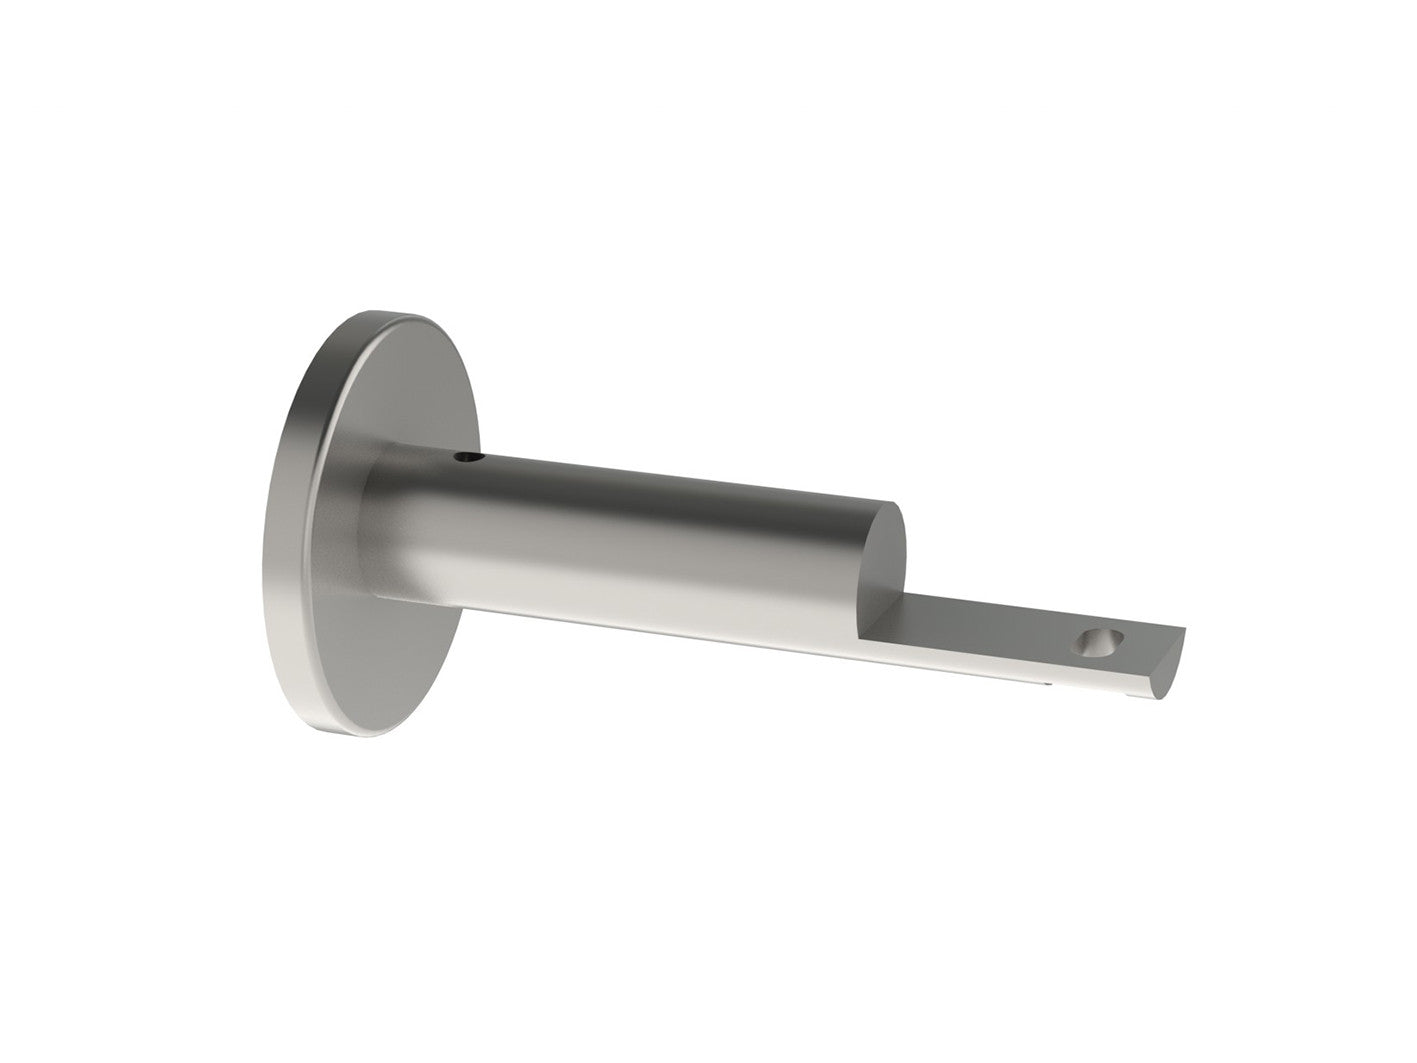 stainless steel passing bracket for 19mm curtain poles by Walcot House